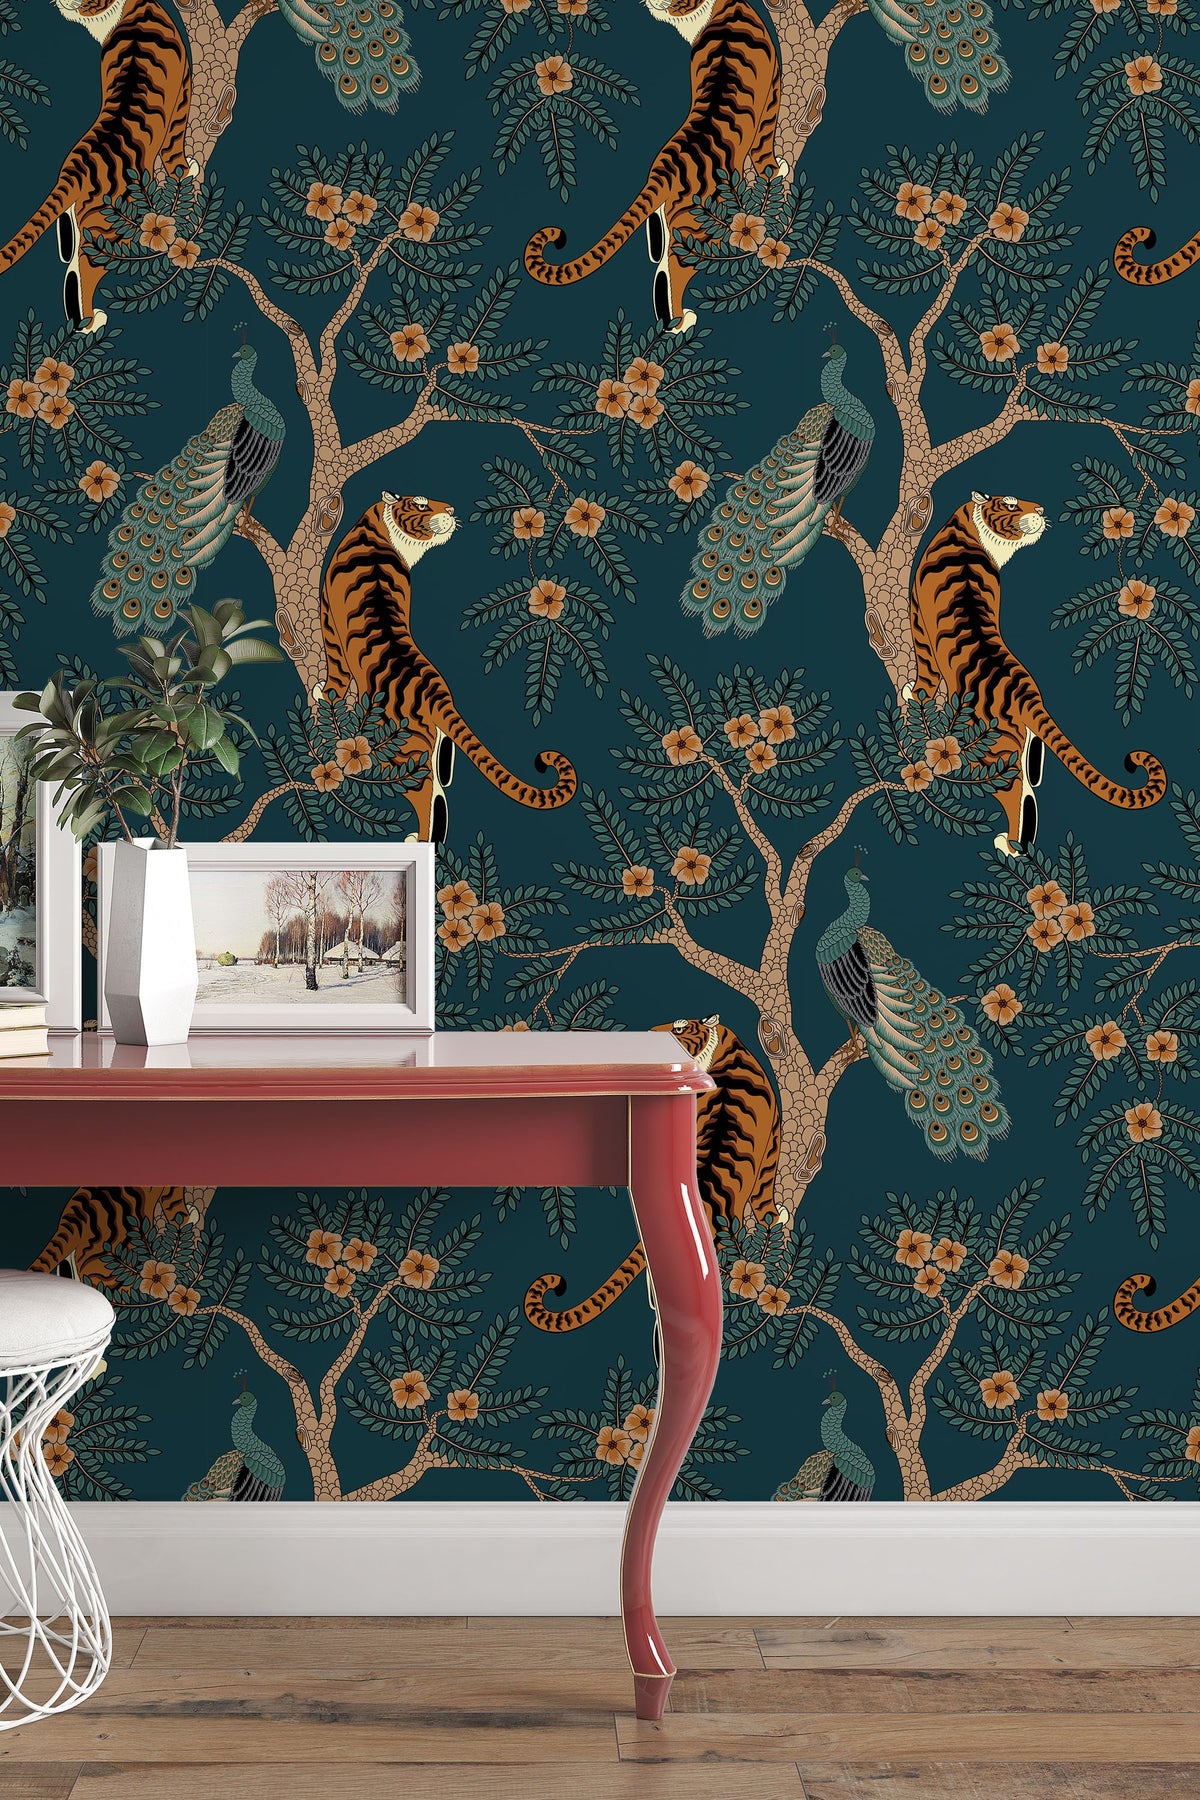 AS interior Theme Peacock Brownee Feather Wall Paper Peel and Stick Self  Adhesive Covering Living Room Bedroom Walls Master Room  Amazonin Home  Improvement